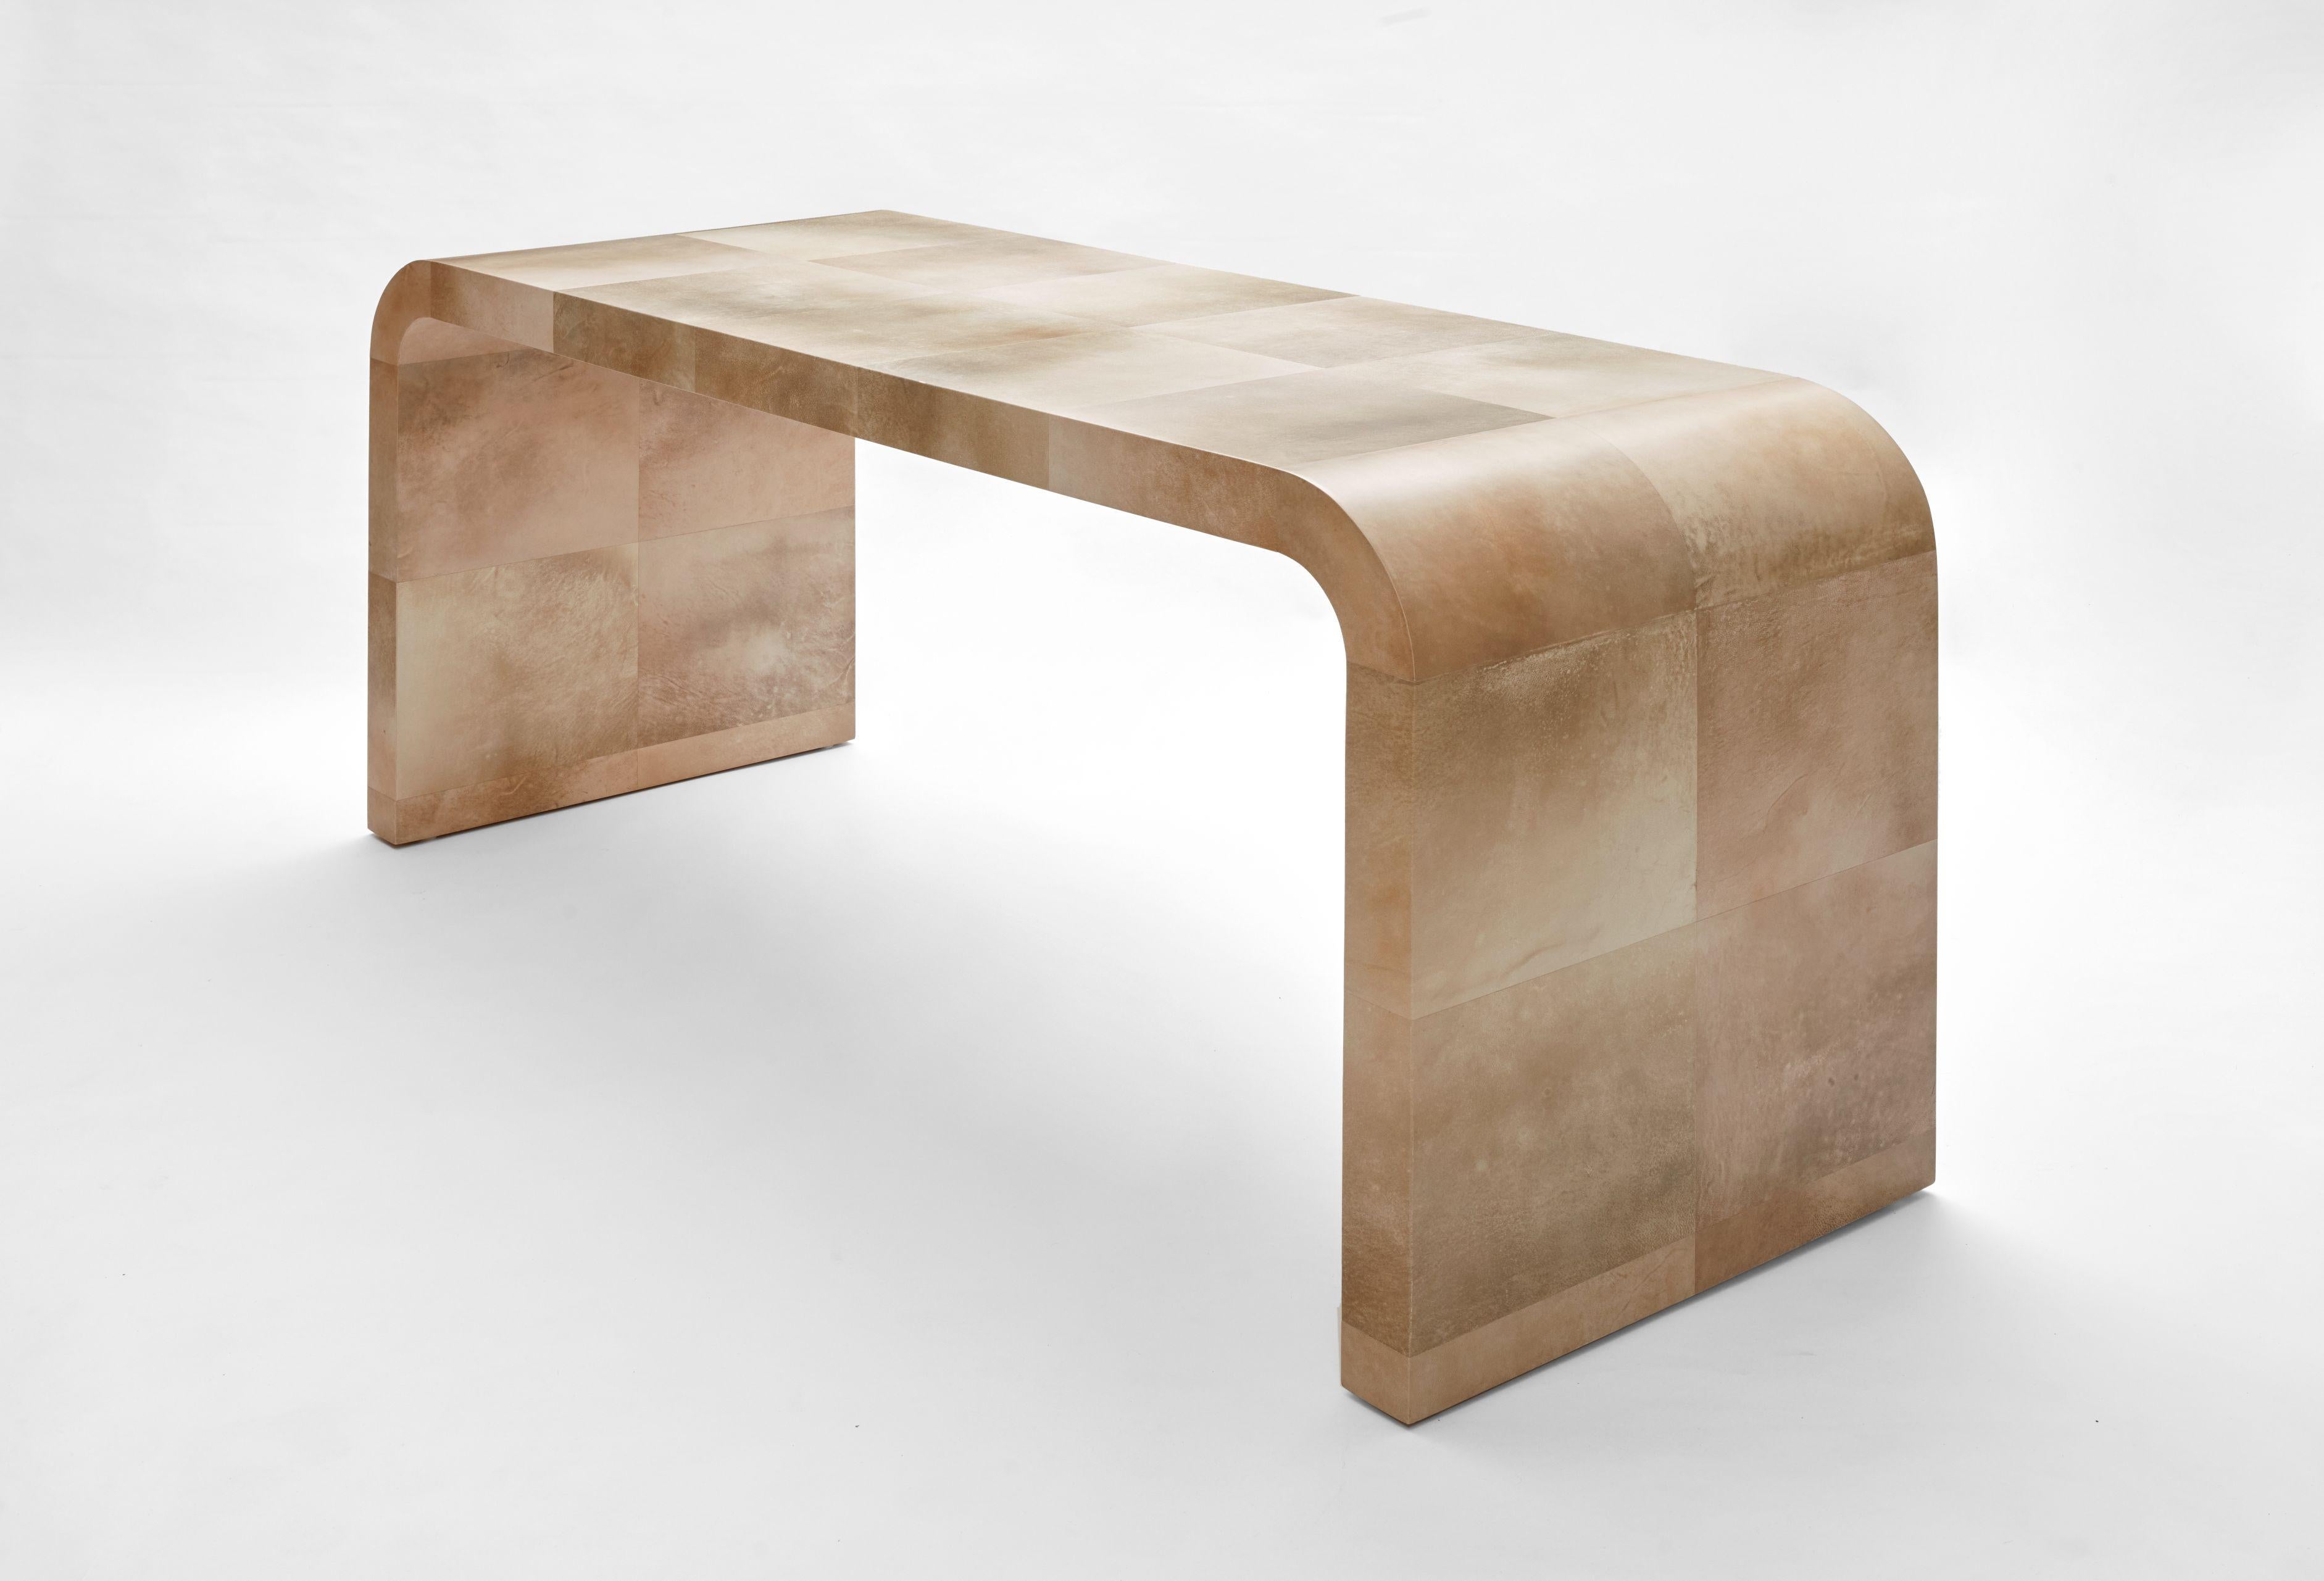 Jean-Michel Frank inspired console table in parchment by Simon Orrell Design
Measures: Width 160cm Depth 58cm Height 75cm
Finish: Parchment - Goat Skin
Made bespoke with a 12 - 14 weeks lead time. 

A timeless design beautifully crafted by